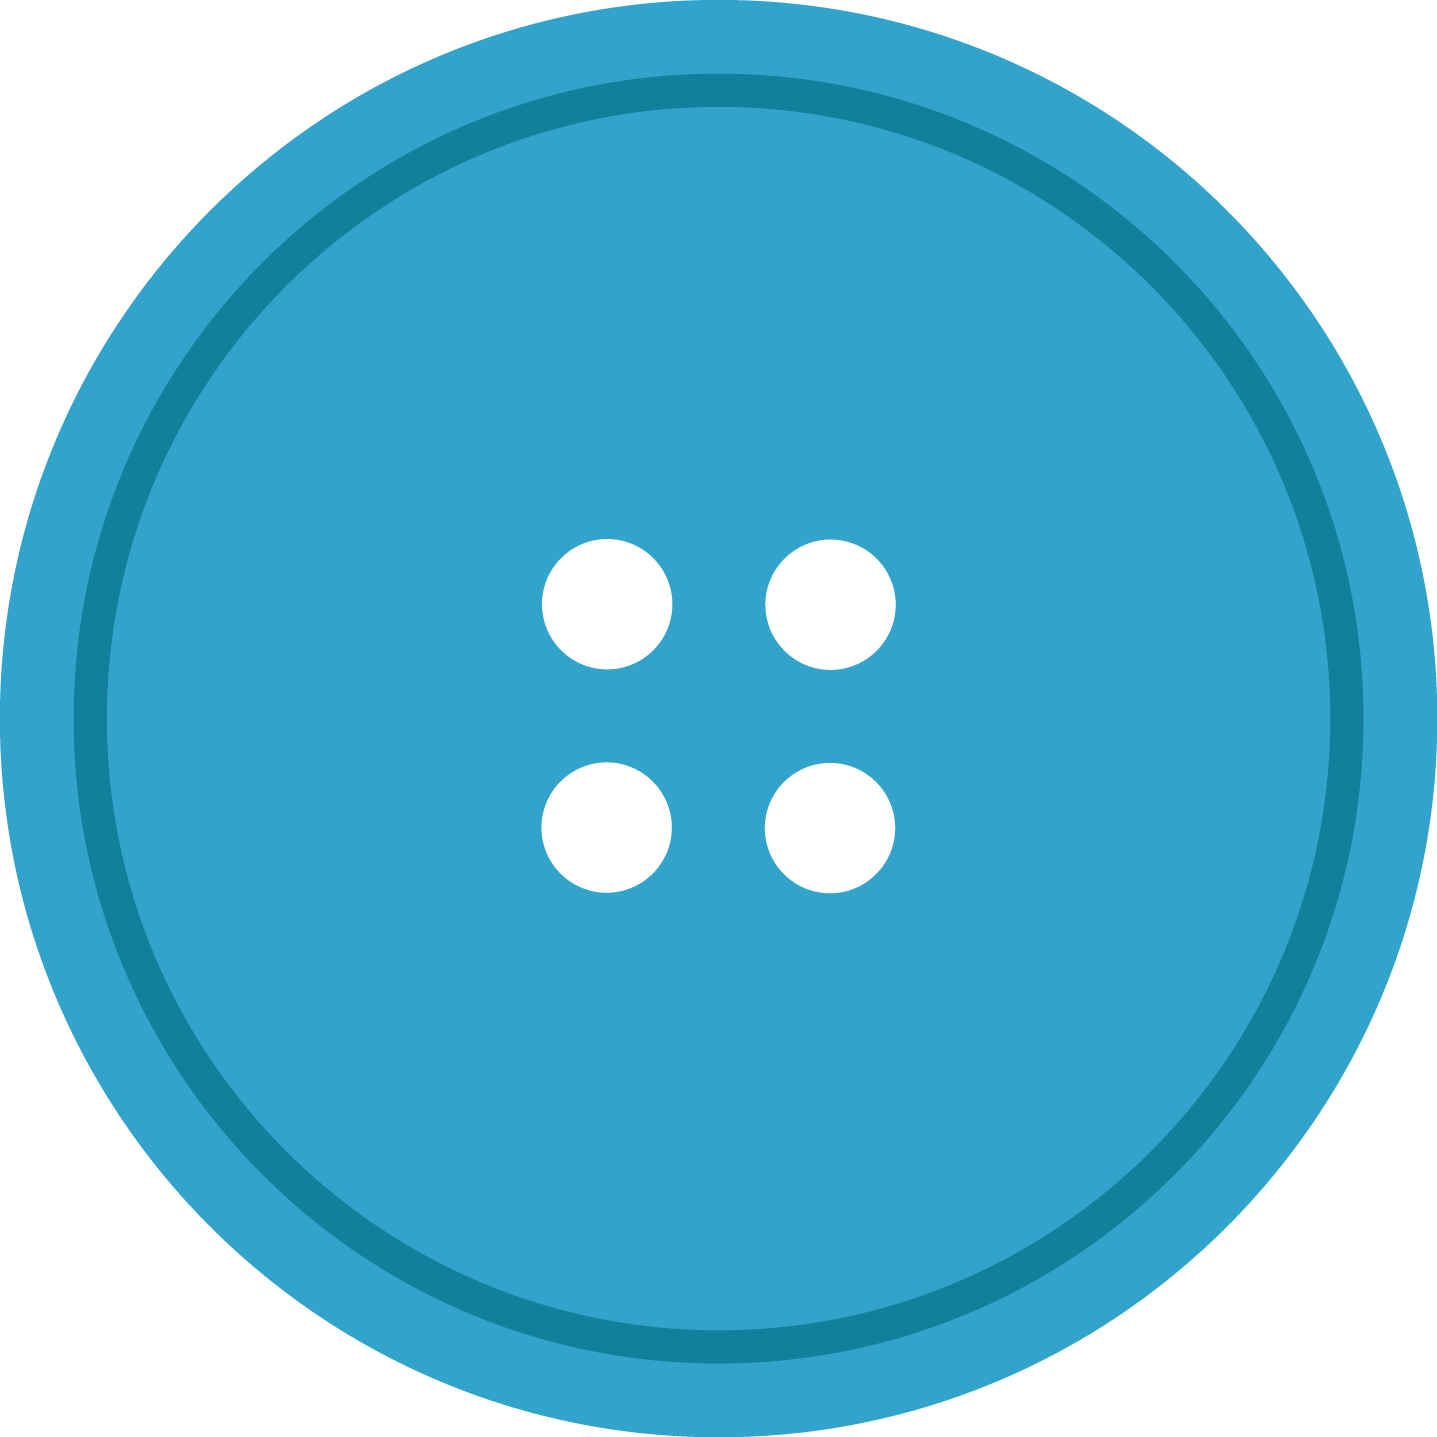 Blue Round Cloth Button With 2 Hole